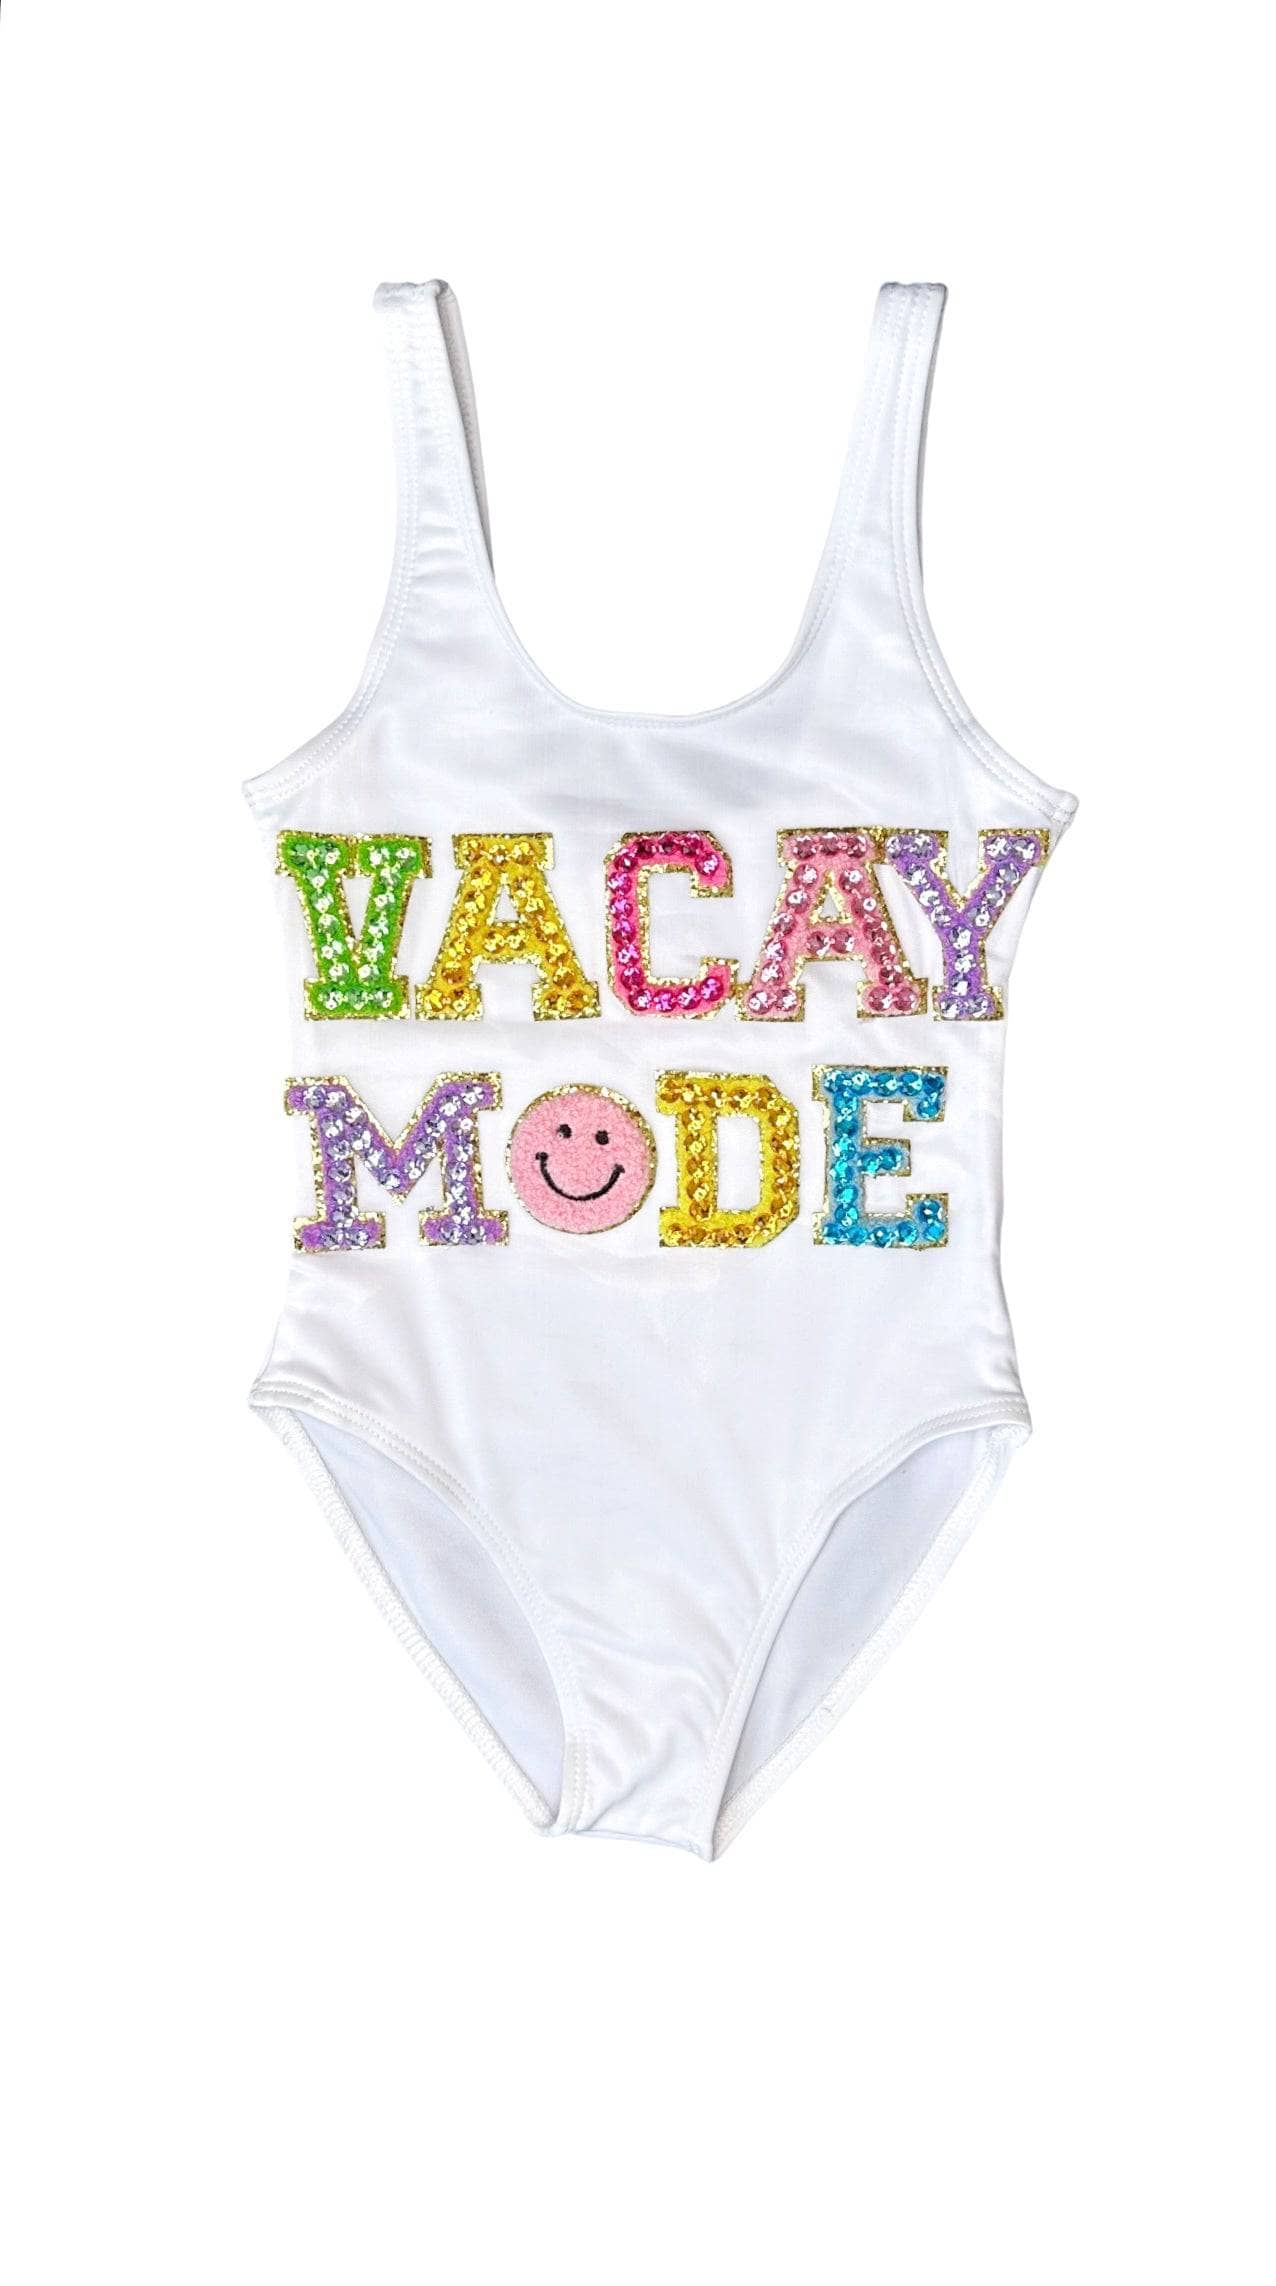 Vacay Livin' Two Piece Swimsuit